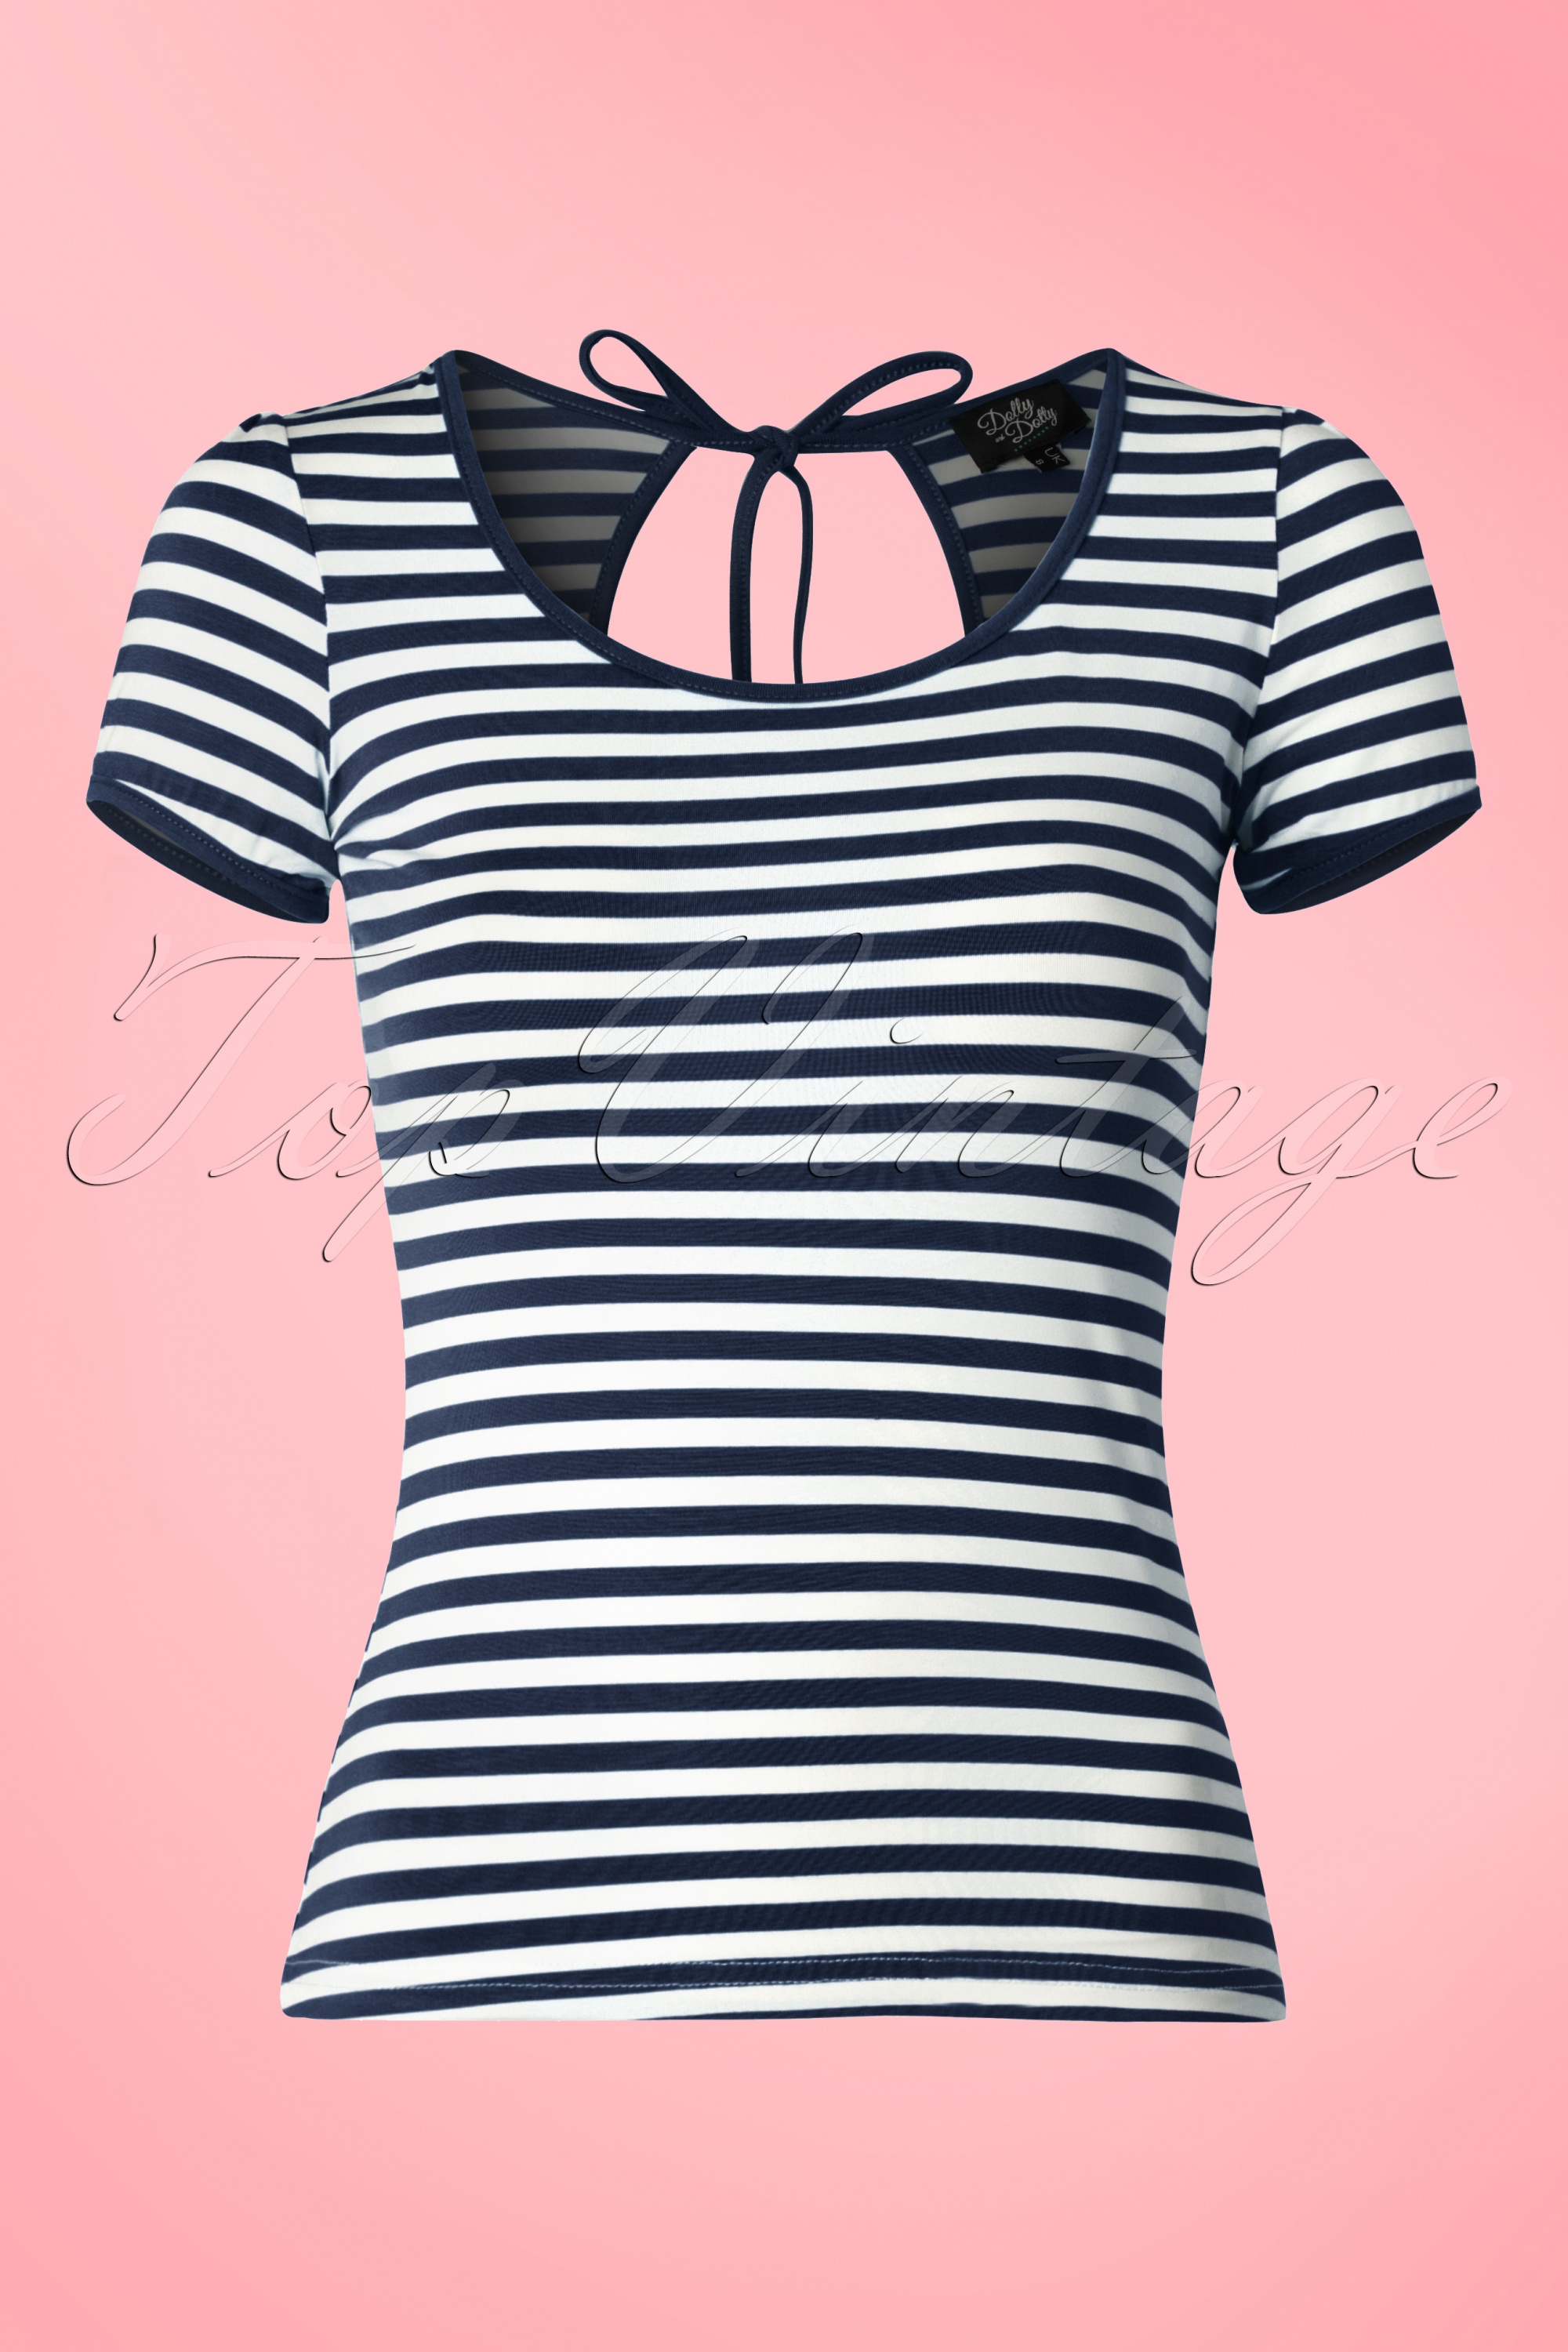 Dolly and Dotty - Gina Stripes Top in marineblauw en wit